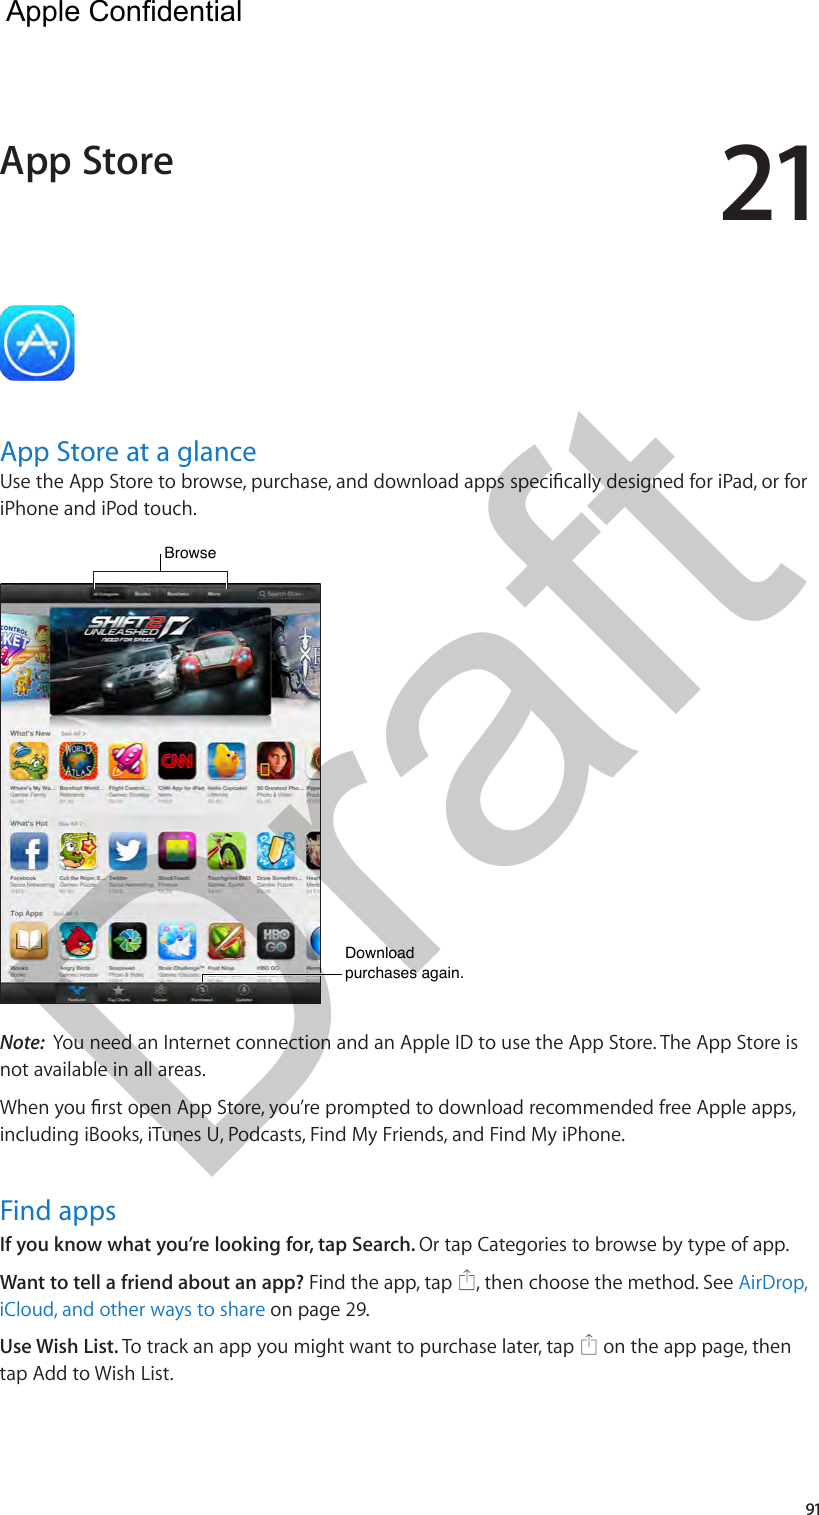 2191App Store at a glanceUse the App Store to browse, purchase, and download apps specically designed for iPad, or for iPhone and iPod touch. Browse  Browse  Download purchases again.Download purchases again.Note:  You need an Internet connection and an Apple ID to use the App Store. The App Store is not available in all areas.When you rst open App Store, you’re prompted to download recommended free Apple apps, including iBooks, iTunes U, Podcasts, Find My Friends, and Find My iPhone.Find appsIf you know what you’re looking for, tap Search. Or tap Categories to browse by type of app.Want to tell a friend about an app? Find the app, tap  , then choose the method. See AirDrop, iCloud, and other ways to share on page 29.Use Wish List. To track an app you might want to purchase later, tap   on the app page, then tap Add to Wish List. App Store  Apple Confidential Draft